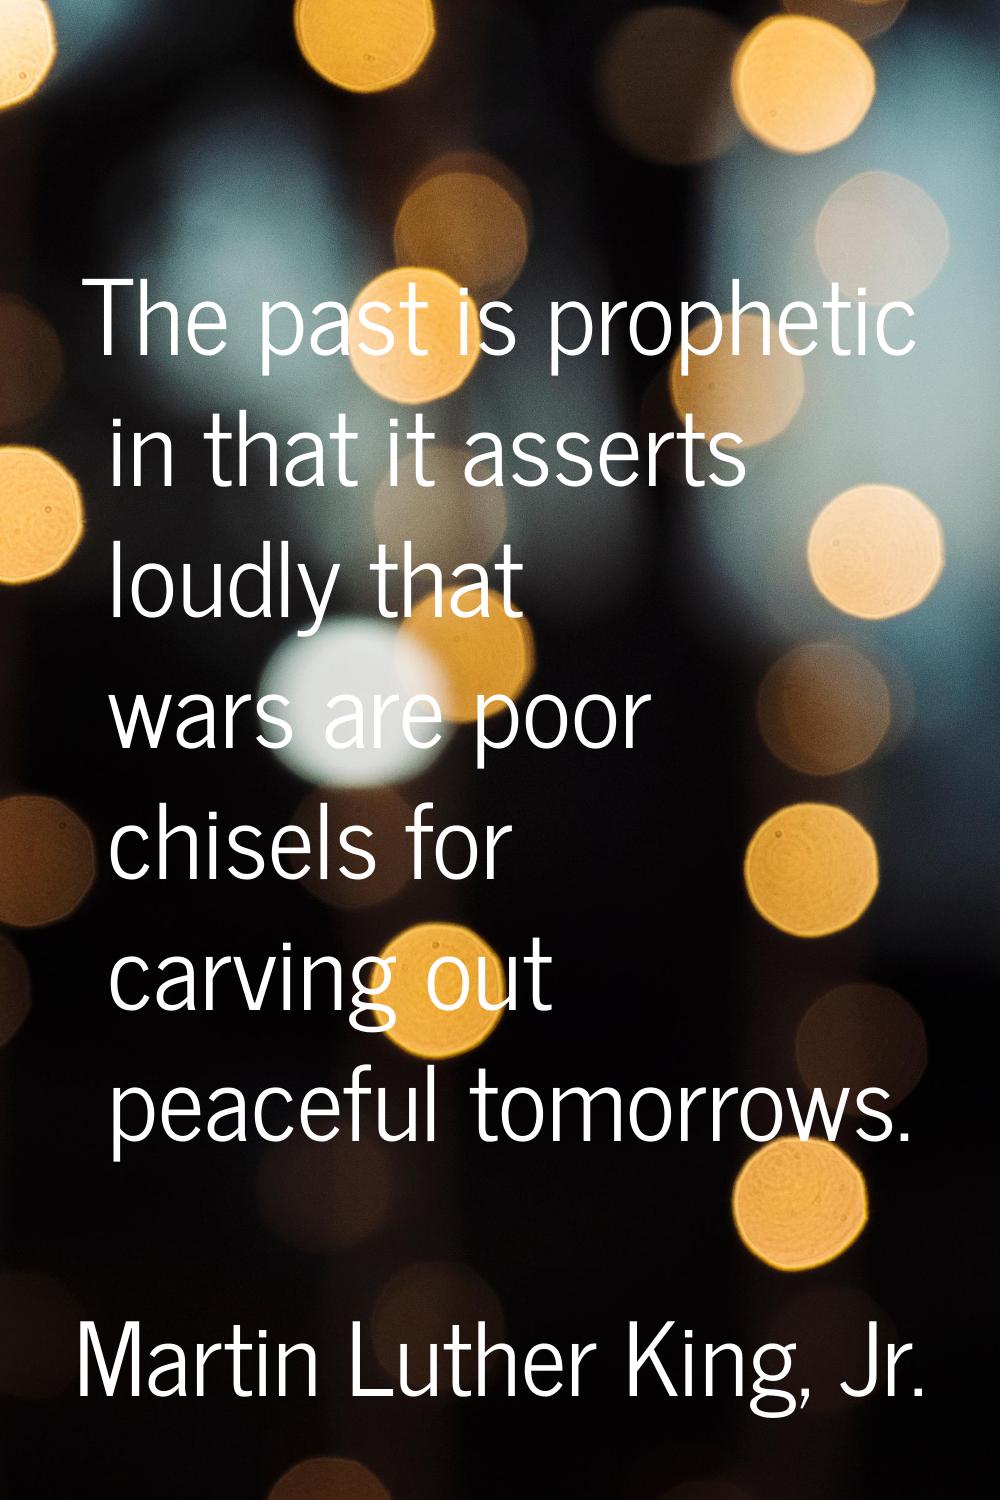 The past is prophetic in that it asserts loudly that wars are poor chisels for carving out peaceful